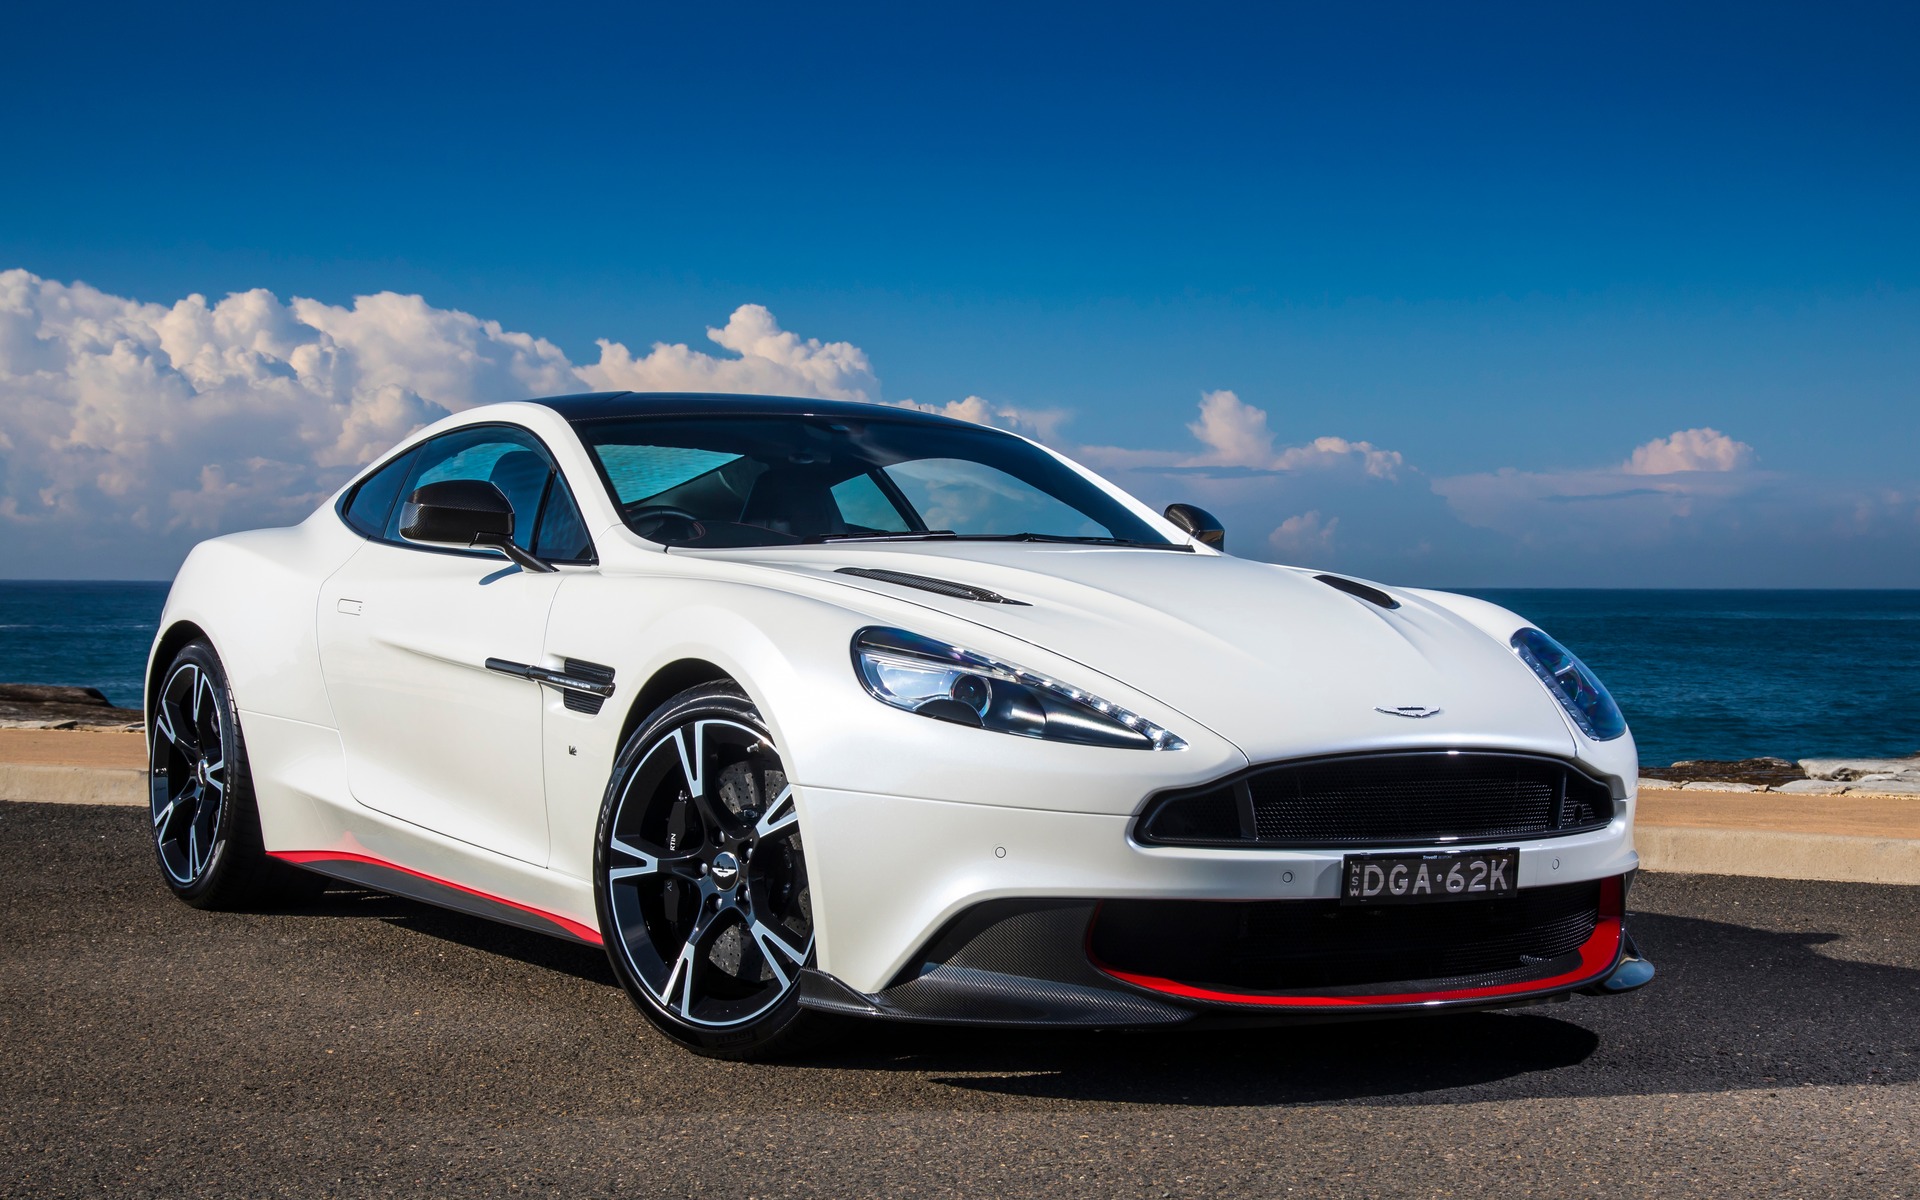 Aston Martin Vanquish - News, reviews, picture galleries and videos - The Car Guide